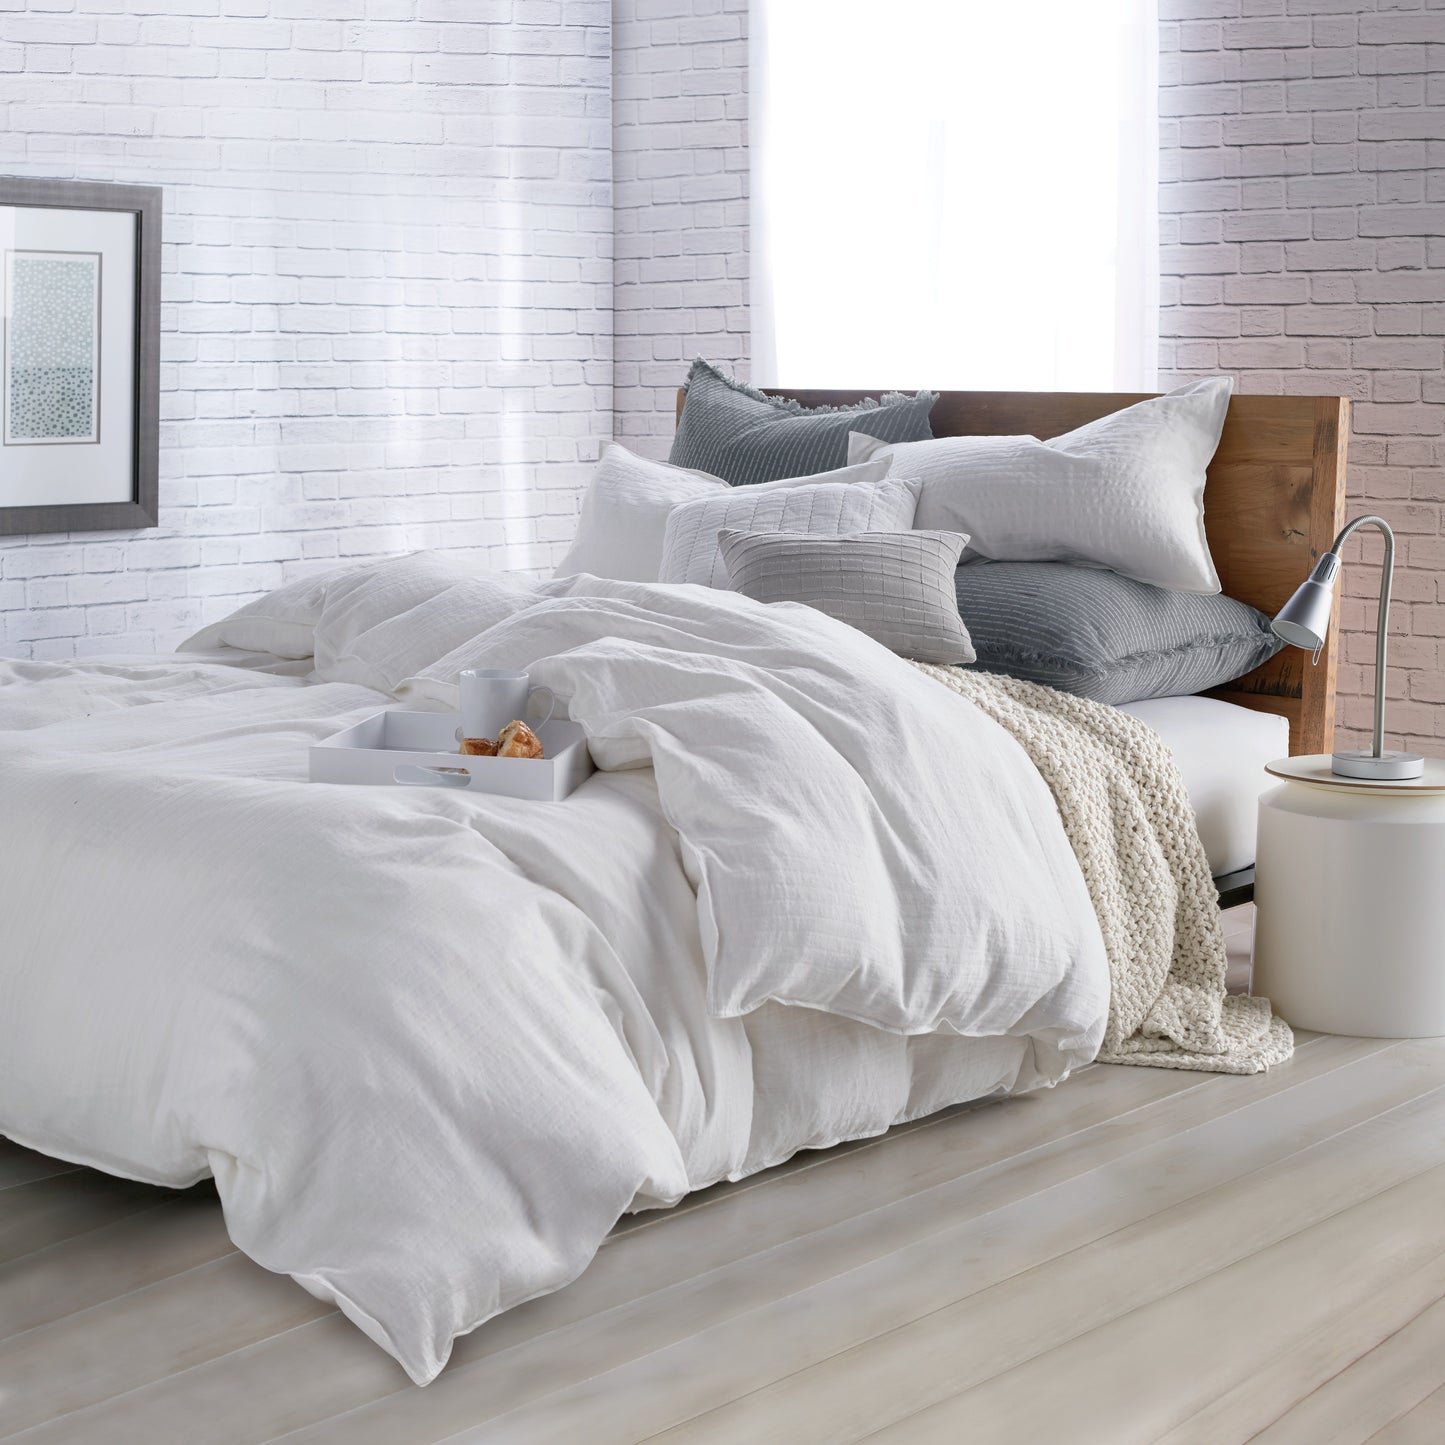 DKNY PURE Comfy Bedding Comforter Collection White